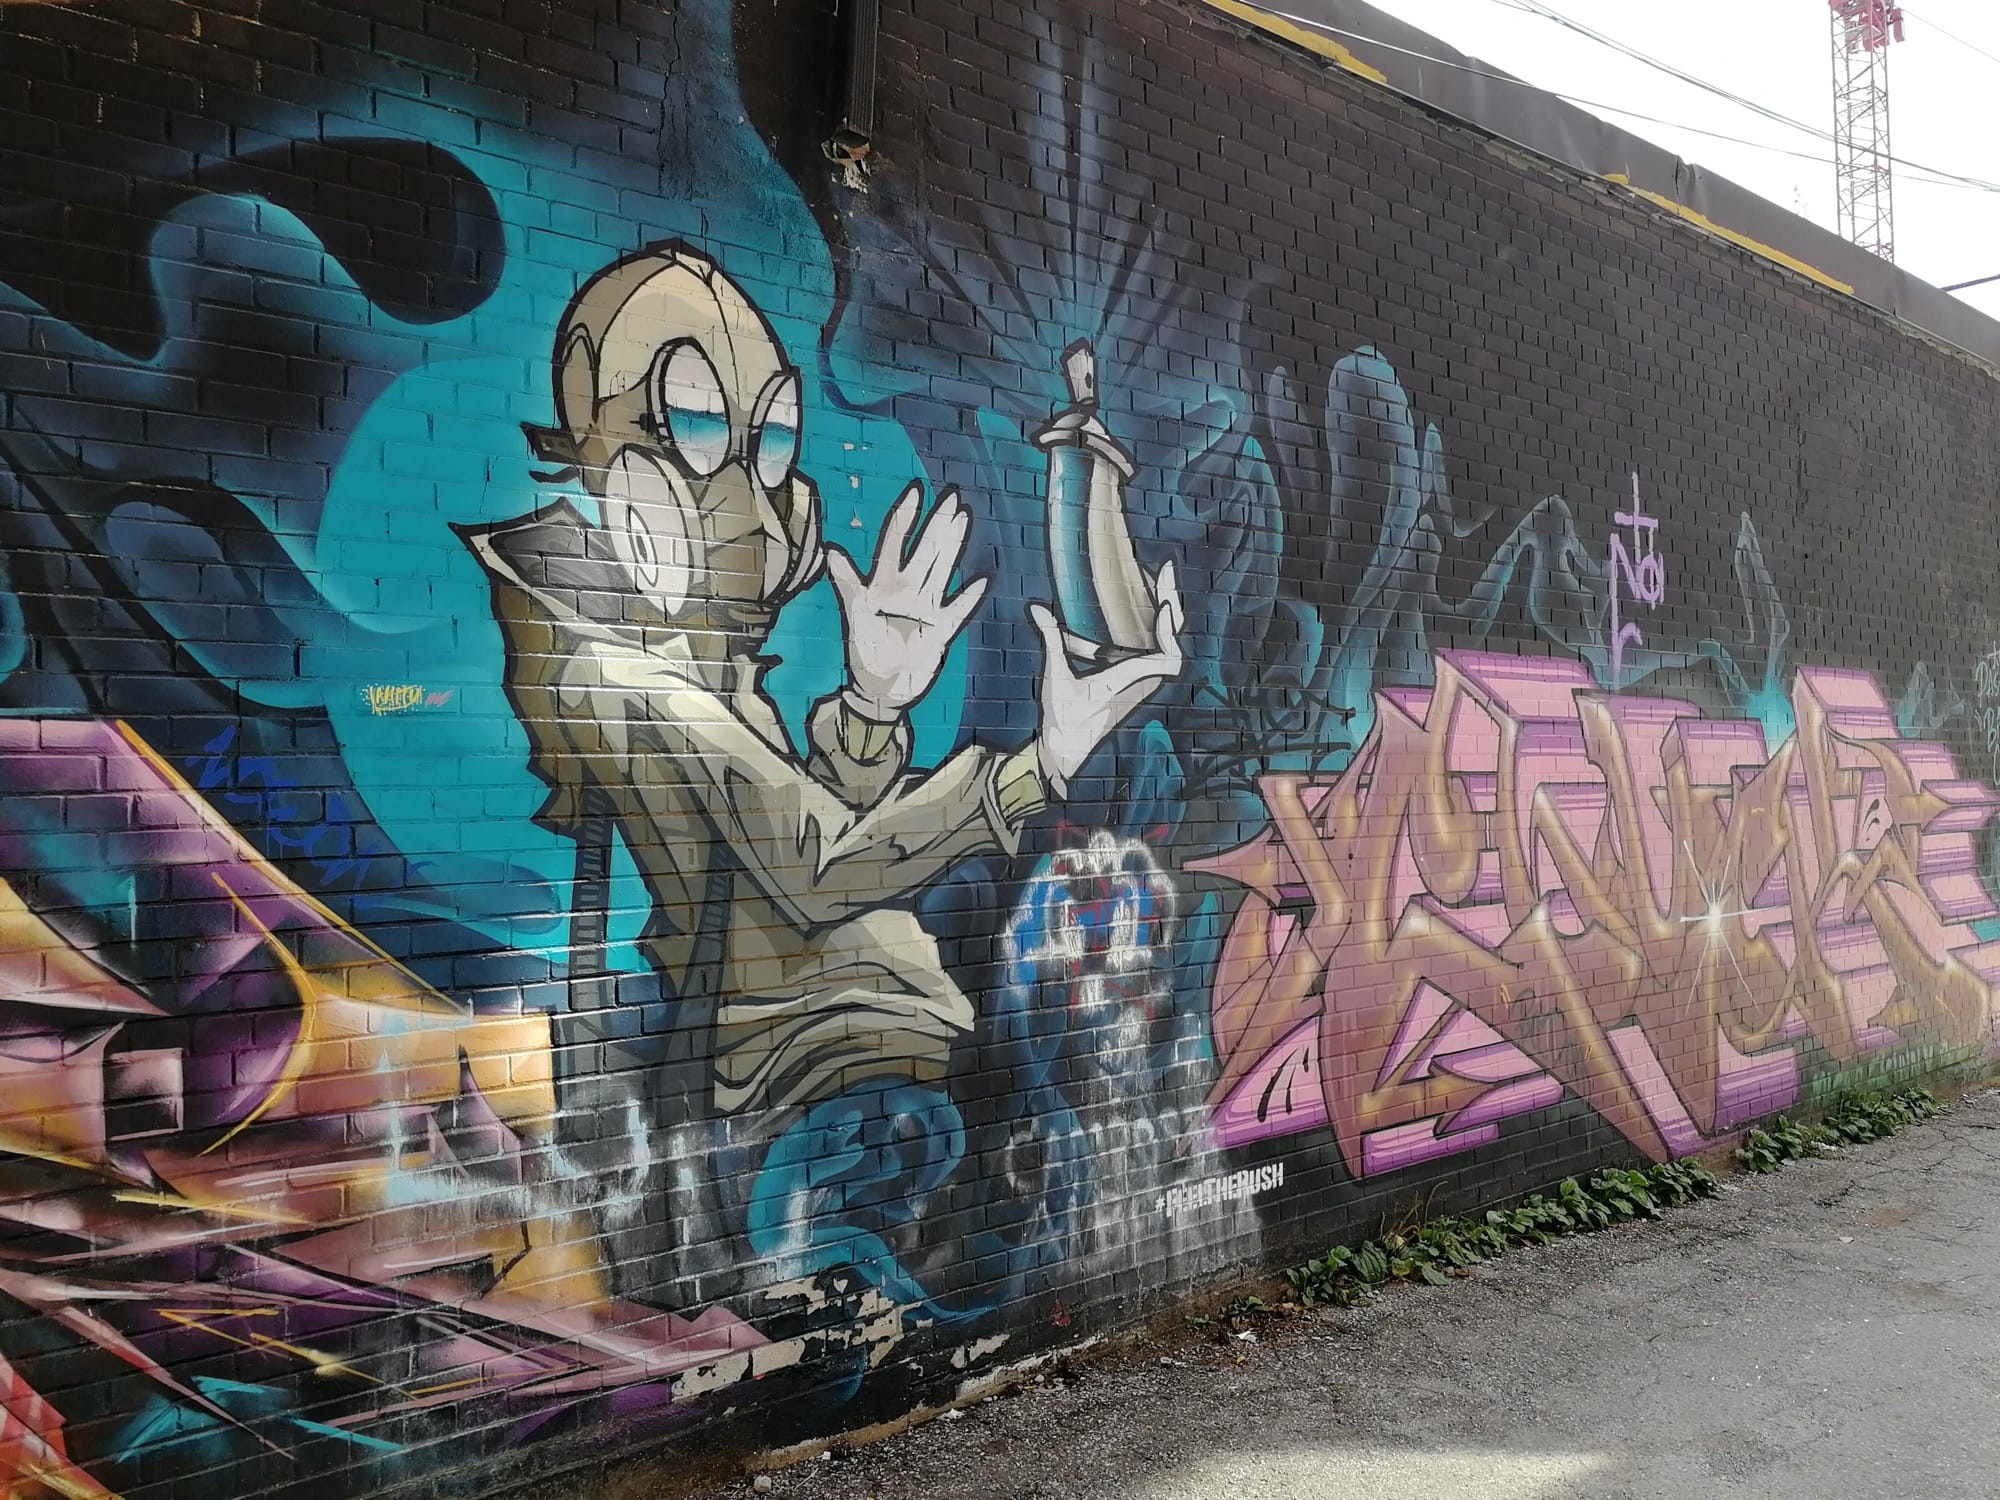 Graffiti 2517  captured by Rabot in Toronto Canada